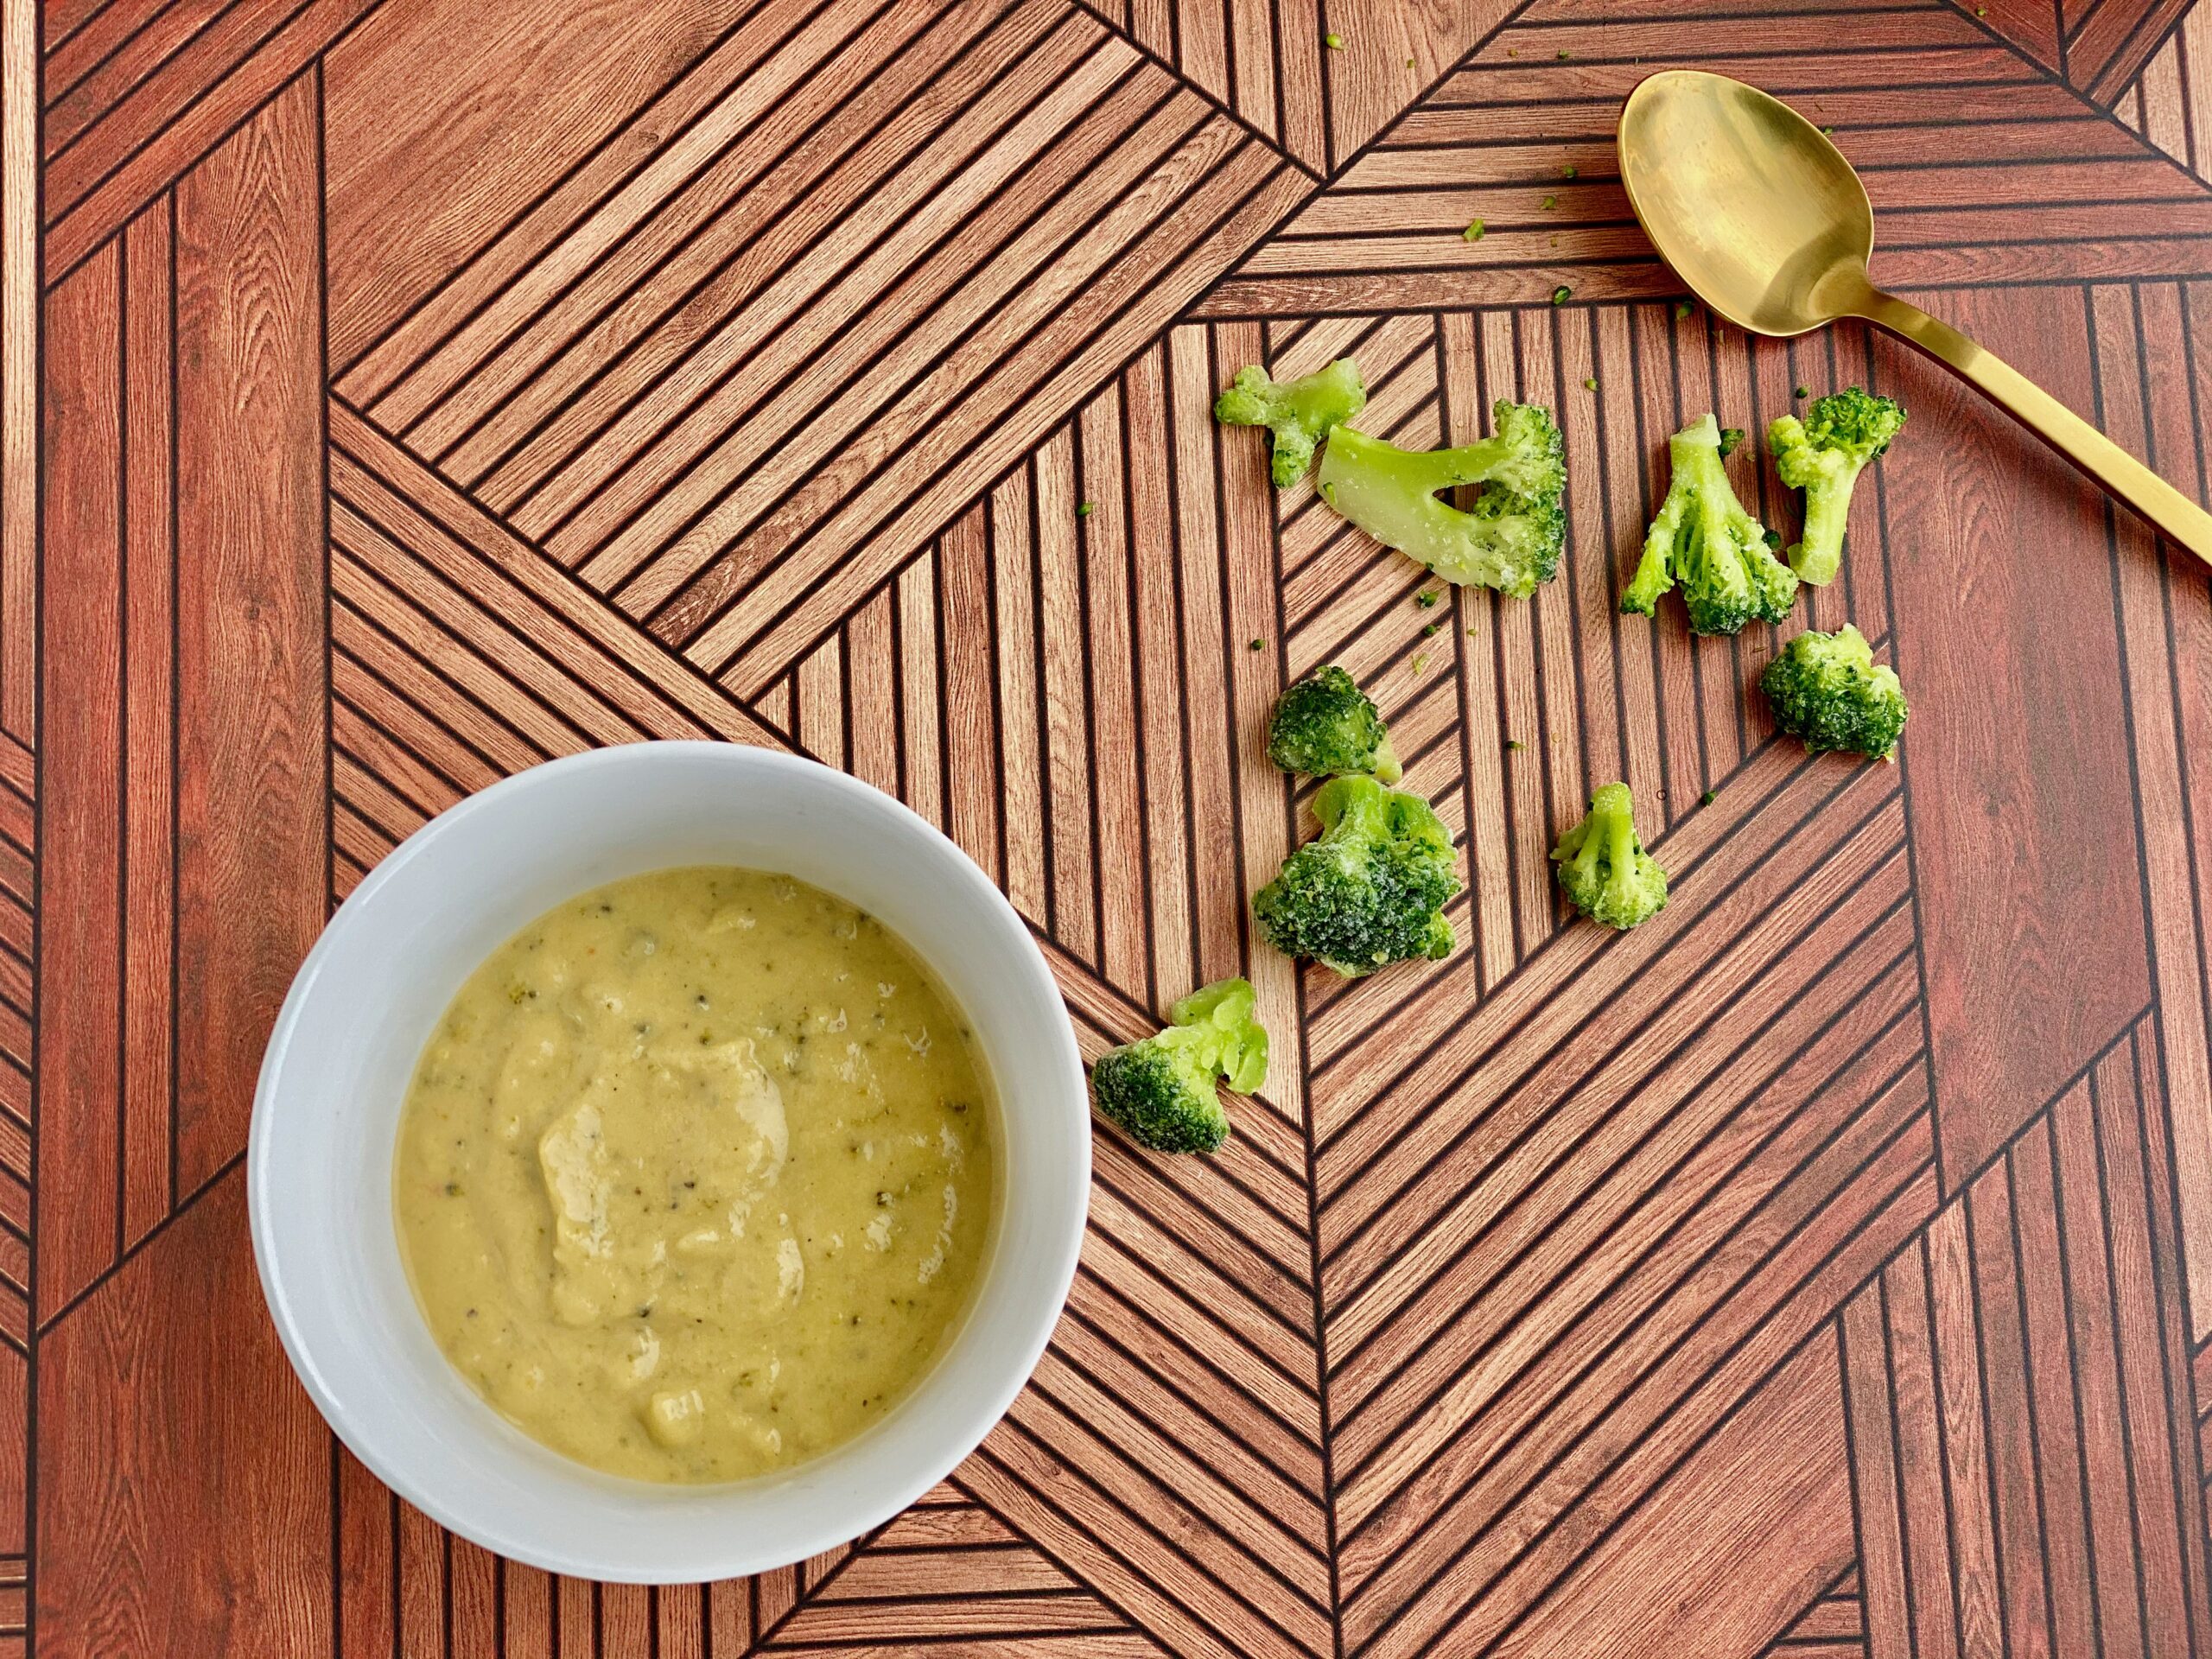 Image of a bowl of soup with pieces of broccoli and a spoon in the background